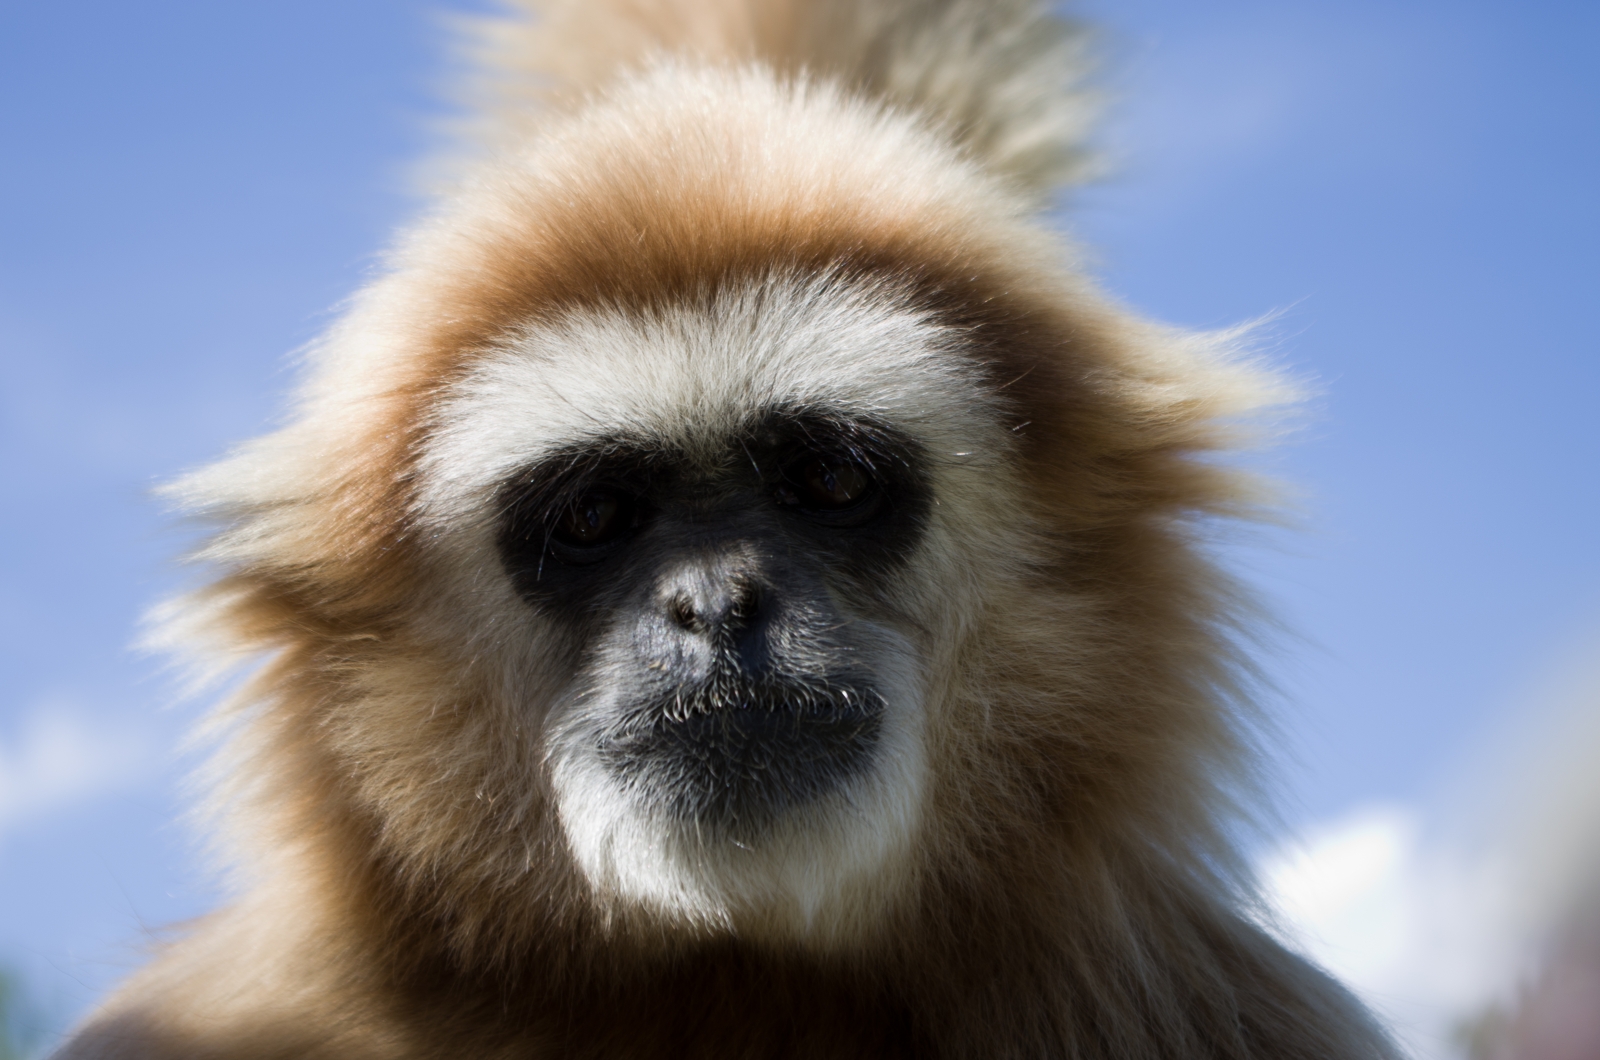 Gibbons talk to one another 'in same language used by human ancestors'